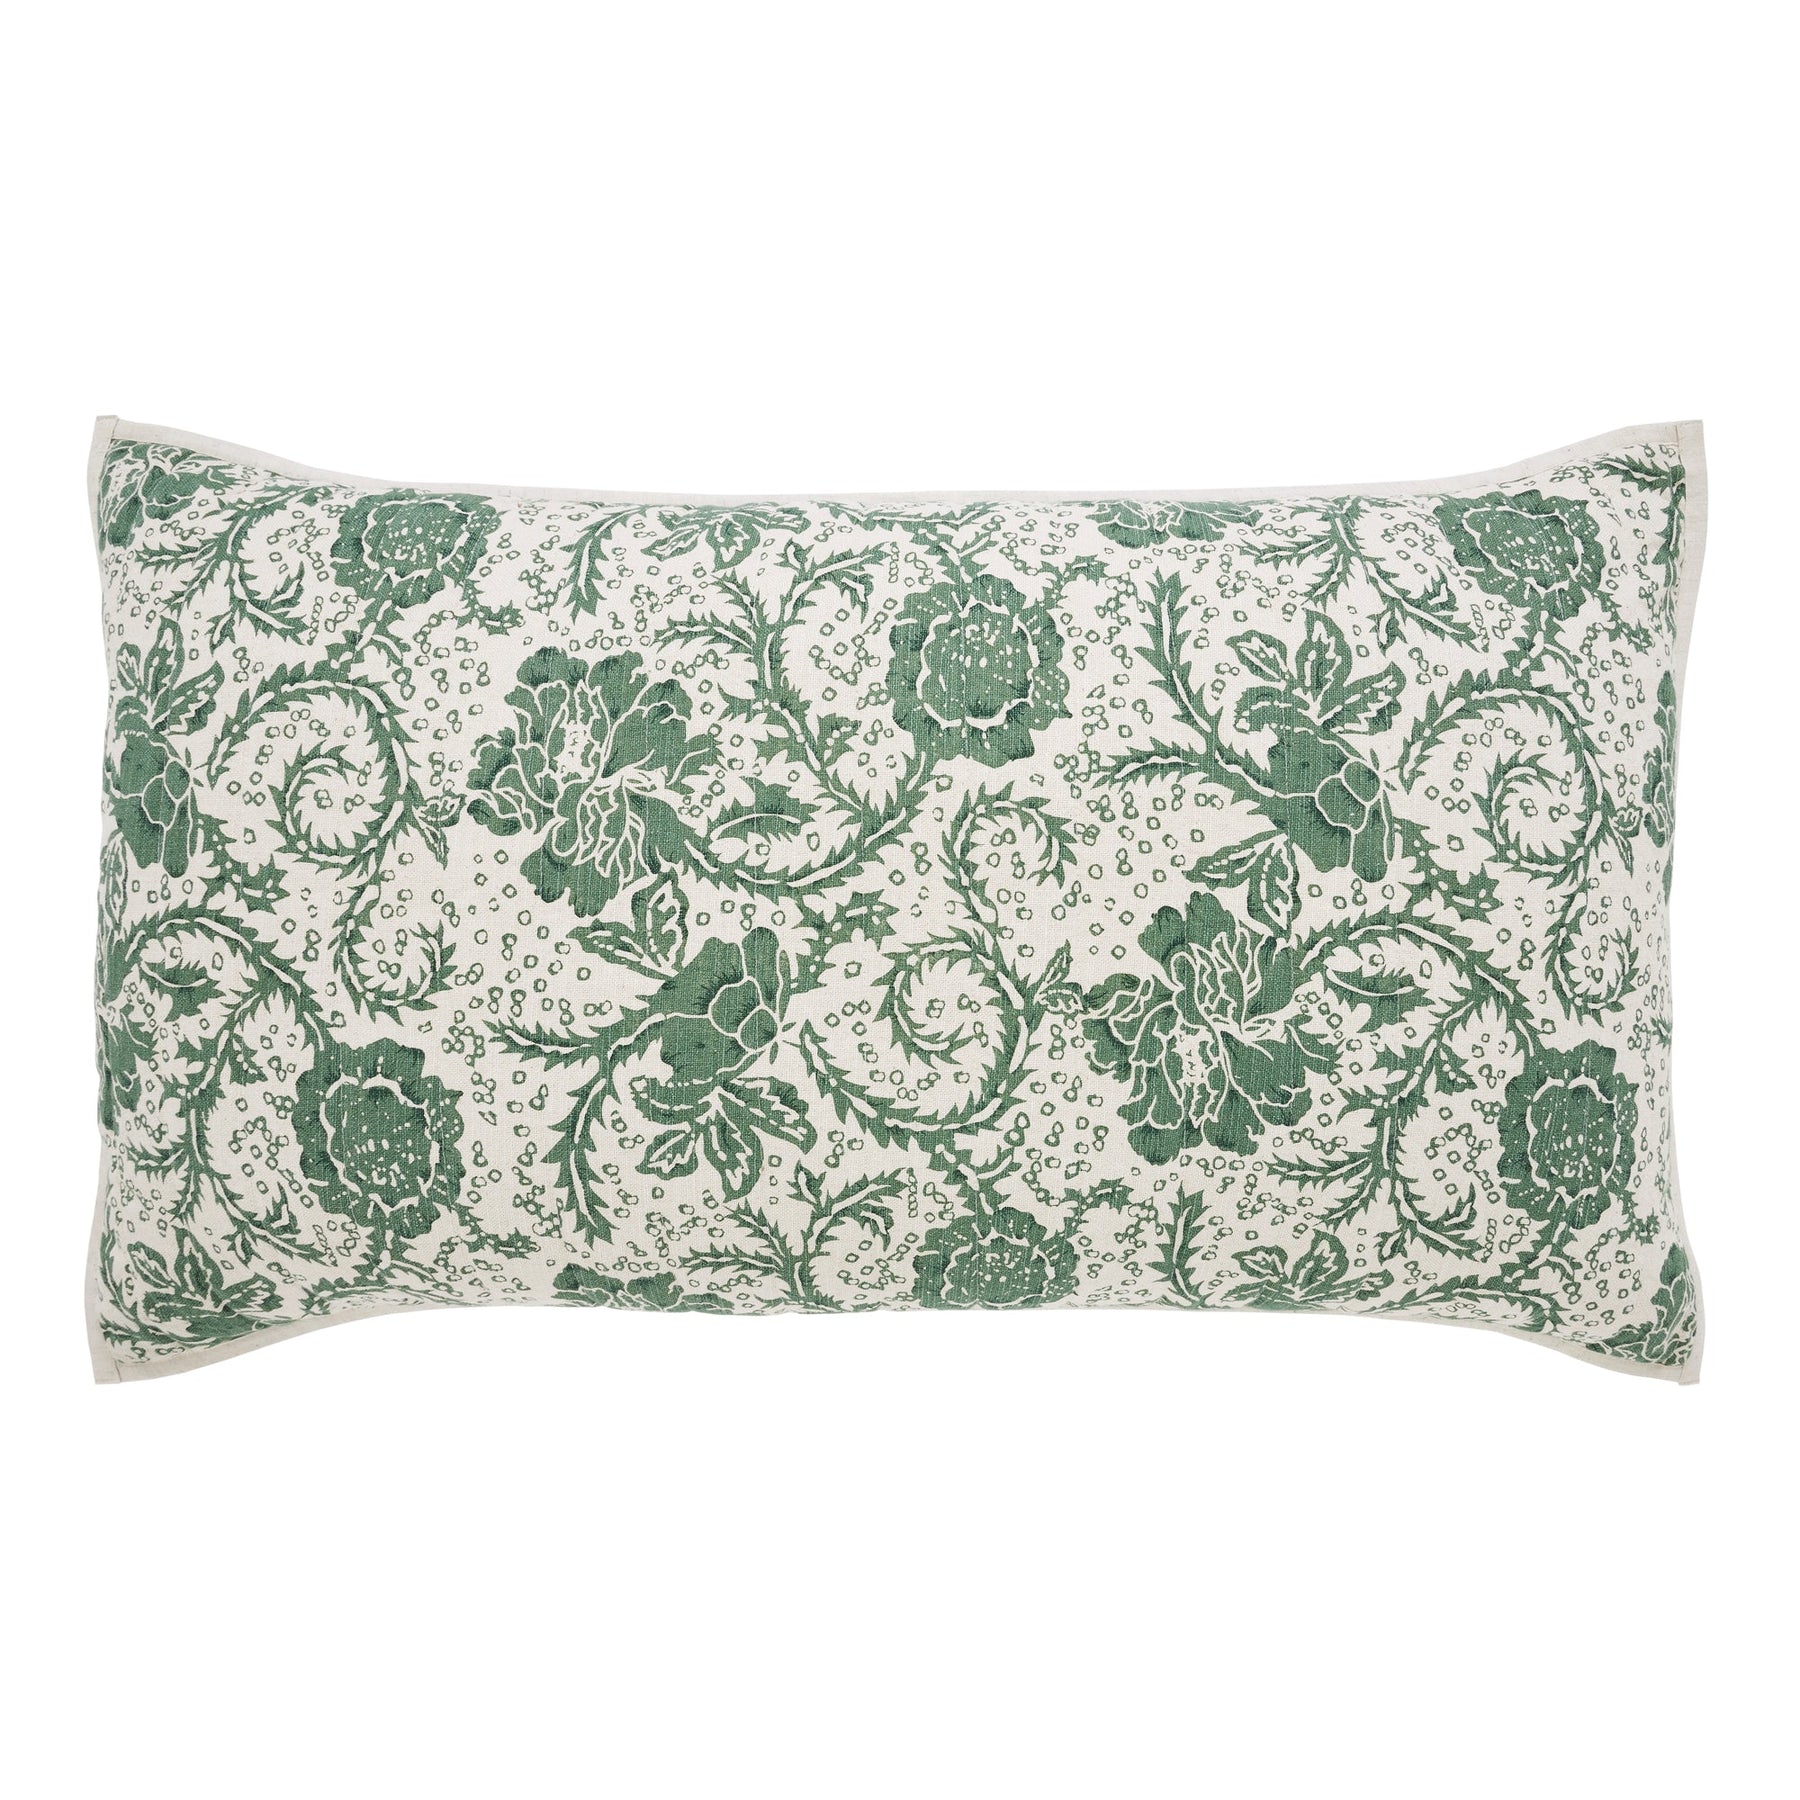 Dorset Green Floral Quilted Coverlet